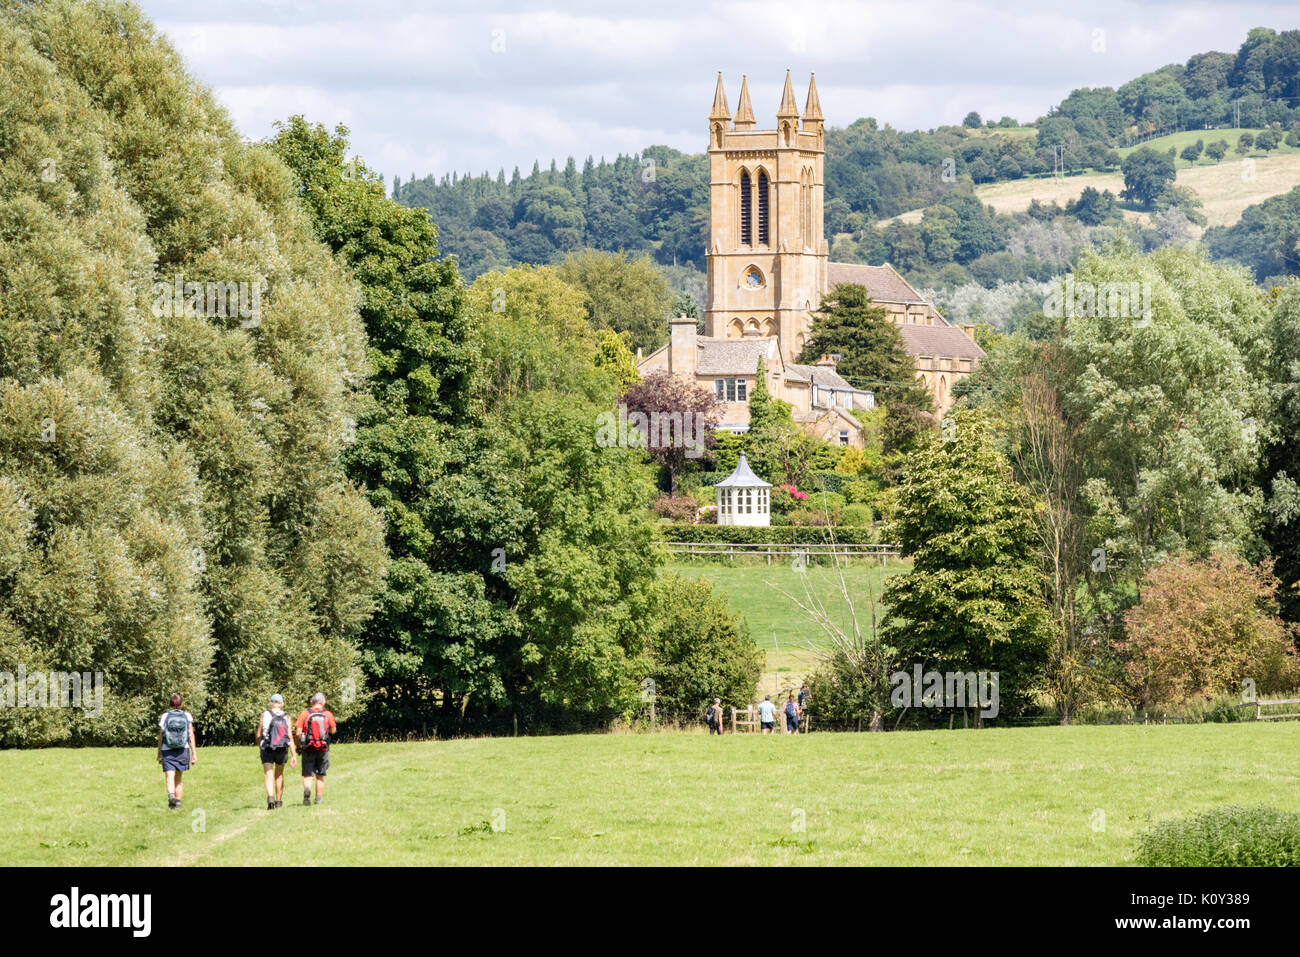 Walking the Cotswold Way near Broadway, the Cotswolds, Worcestershire, England, UK Stock Photo